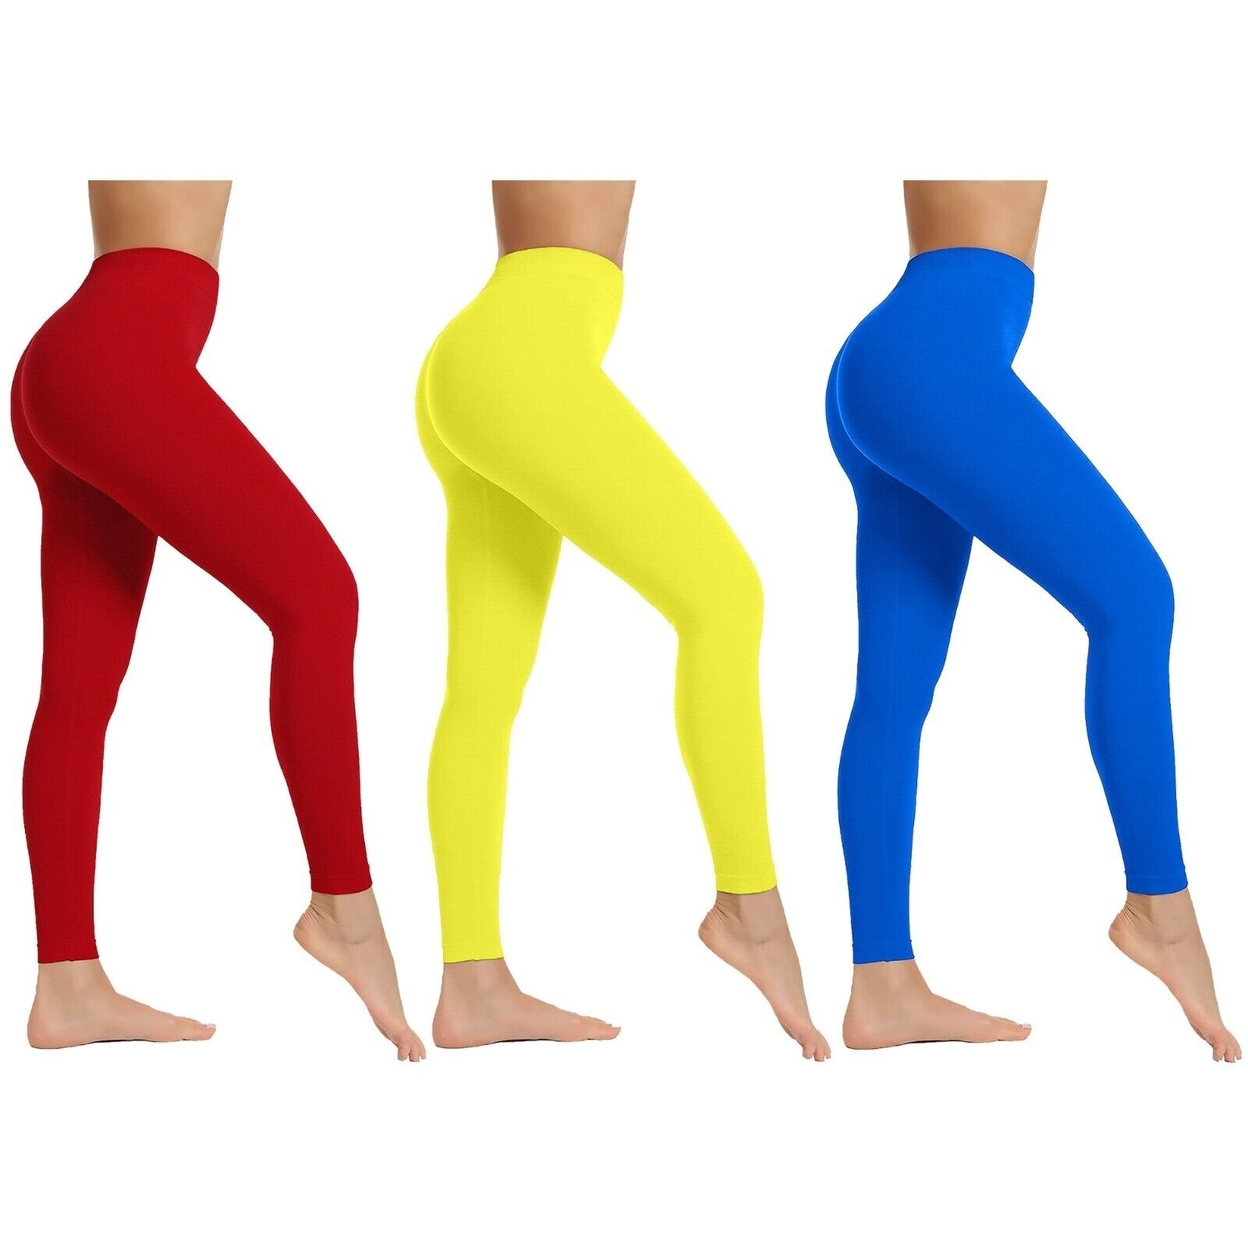 3-Pack: Women's High Waist Super Soft Active Athlete Stretch Yoga Cozy Leggings - Blue,red,yellow, X-small